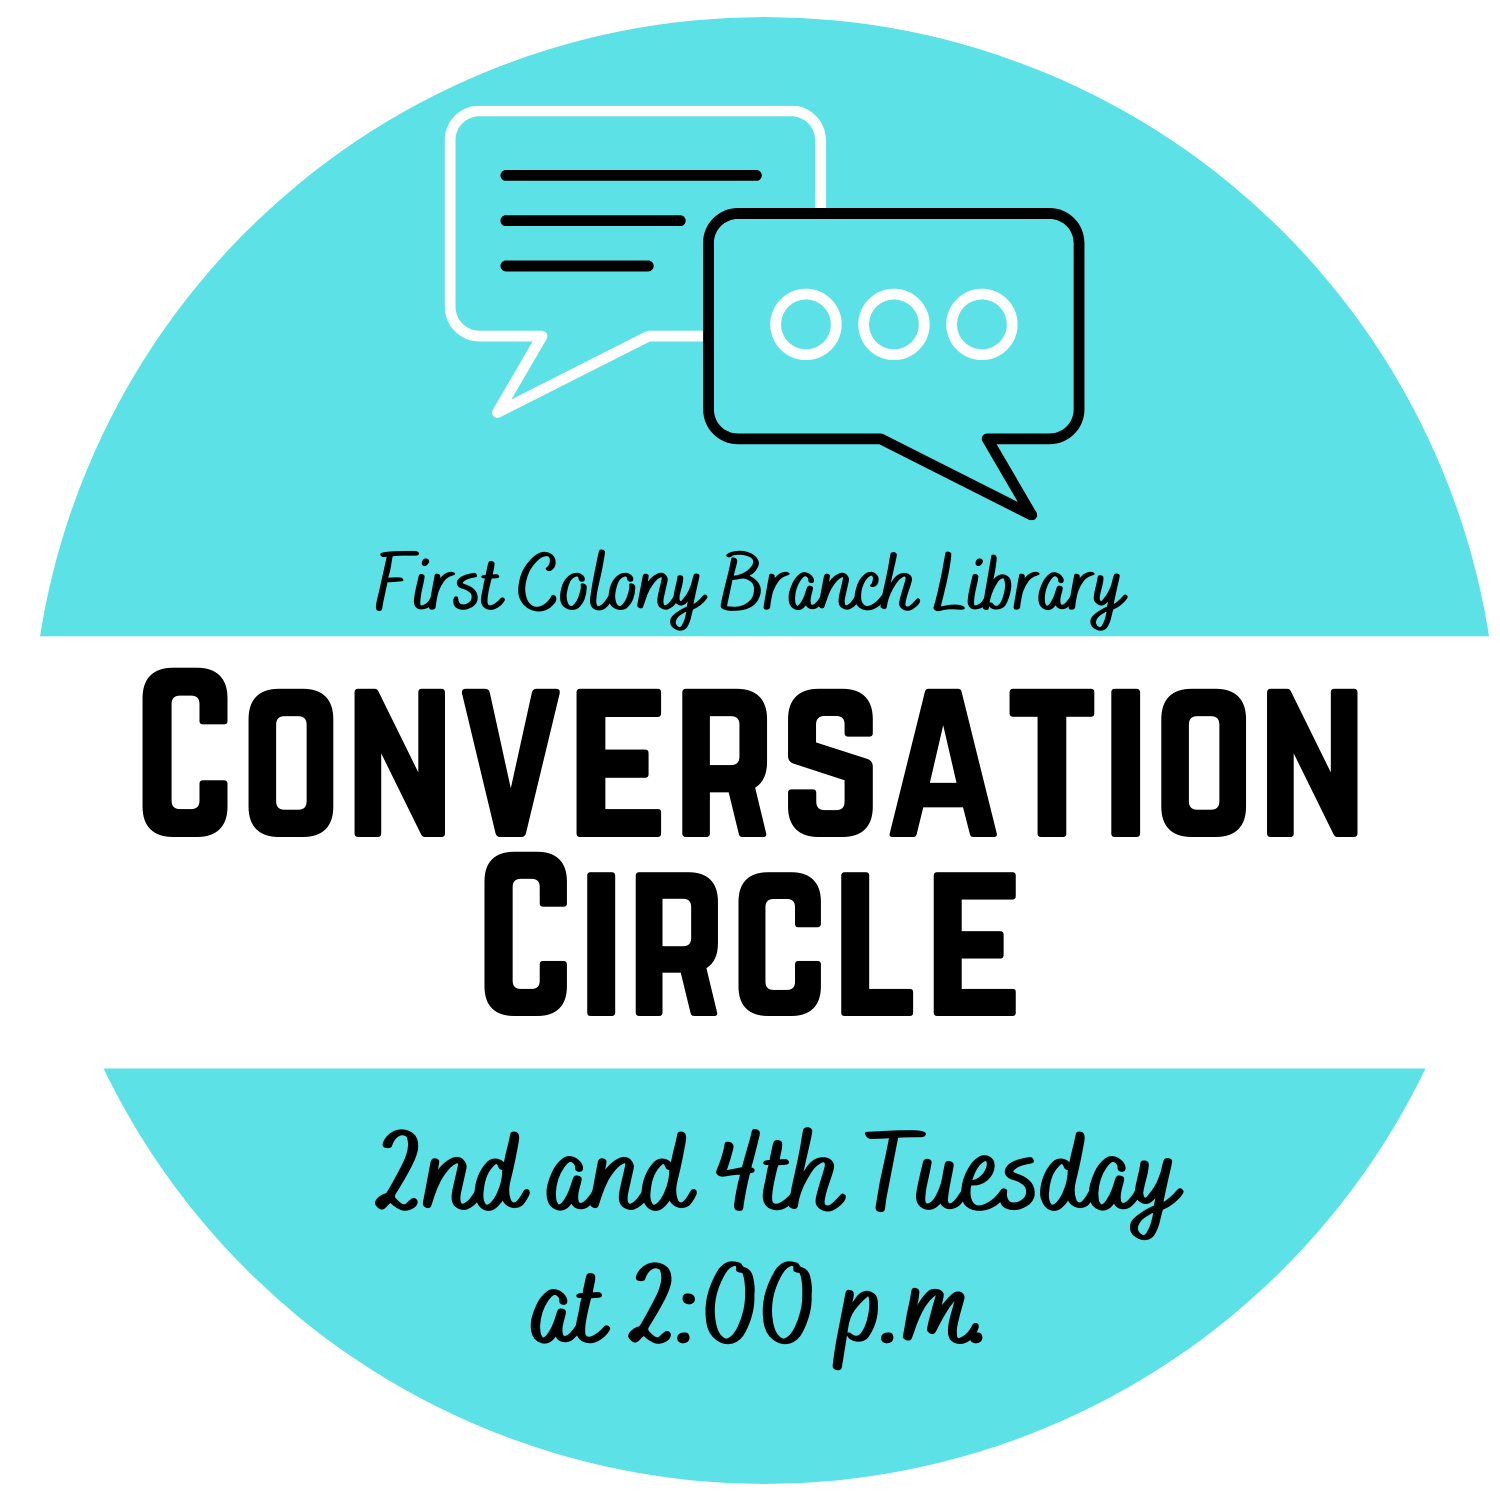 Speech bubbles and text Conversation Circle 2nd and 4th Tuesday at 2pm